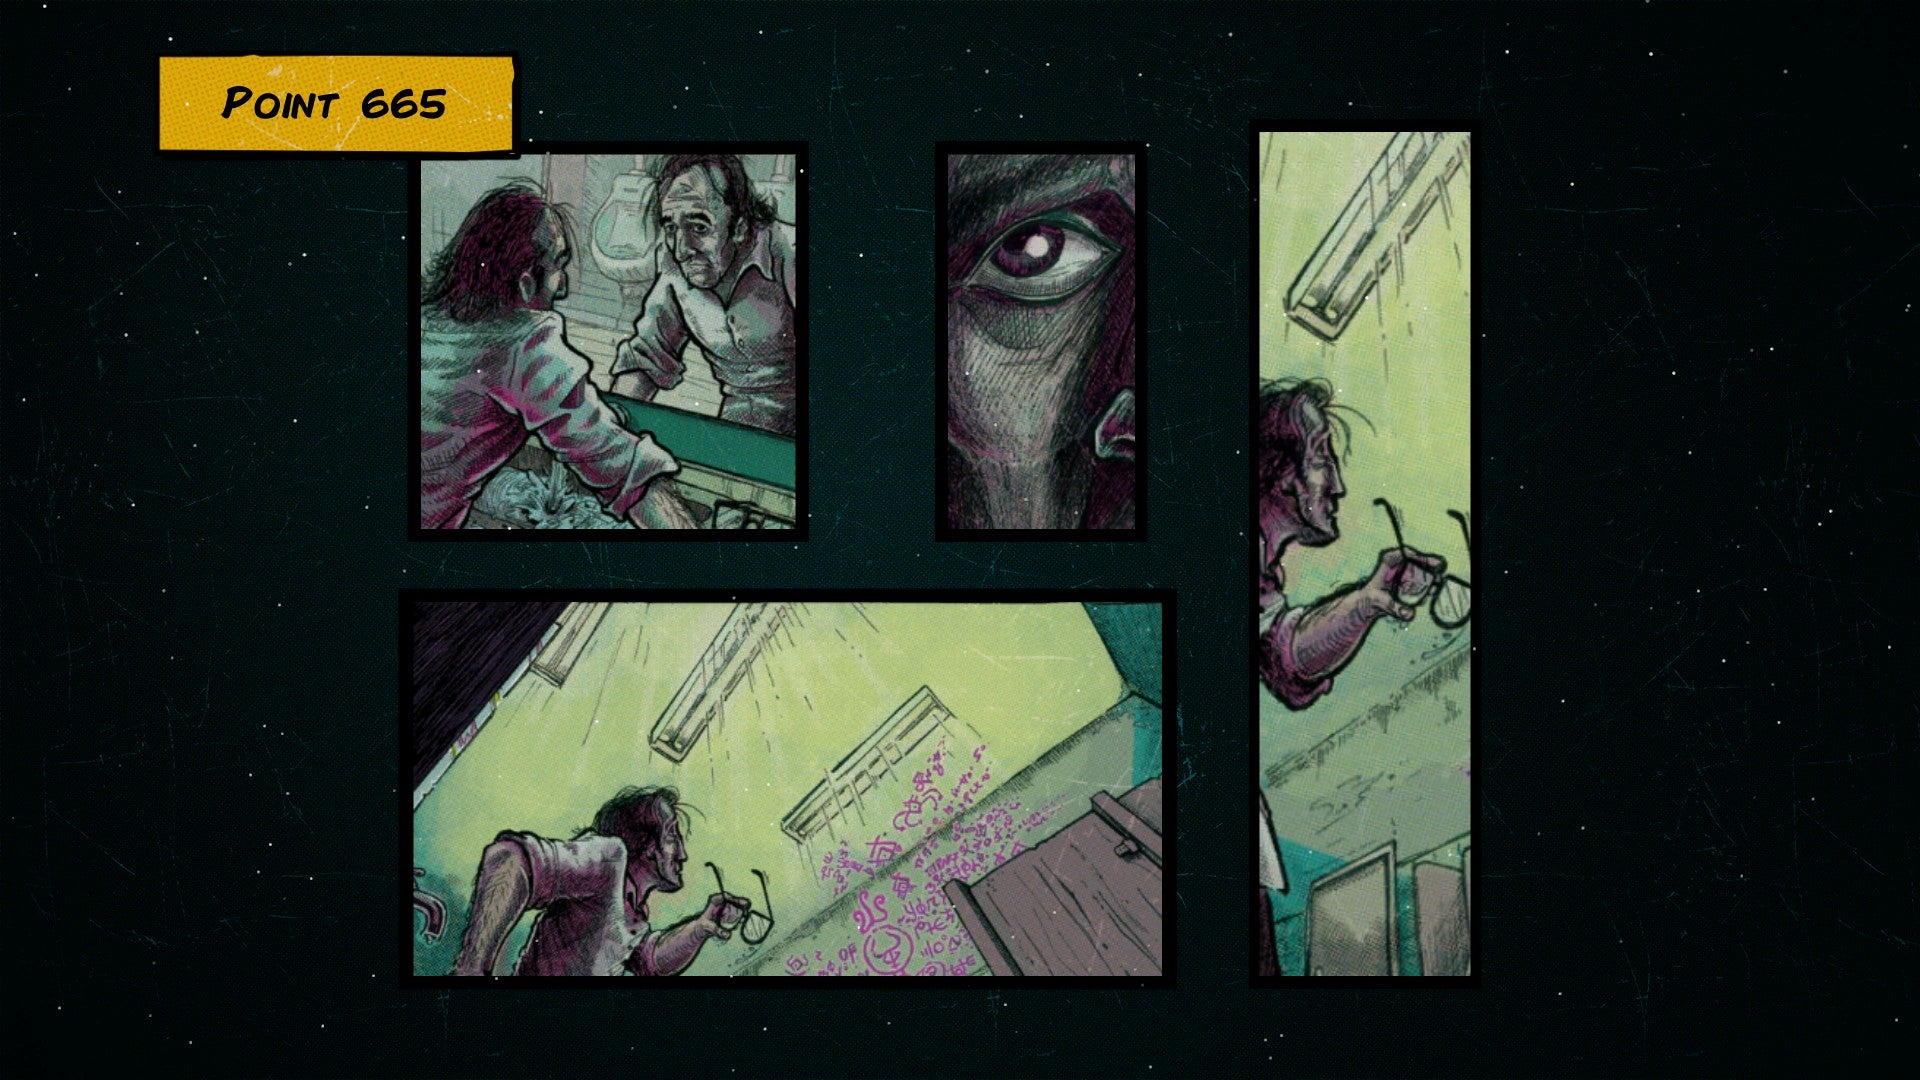 A screenshot from Blackout: The Darkest Night, arranged like a page in a comic book, showing the character looking at themselves in the mirror in a public bathroom, then having a vision of strange symbols appearing suddenly on the wall